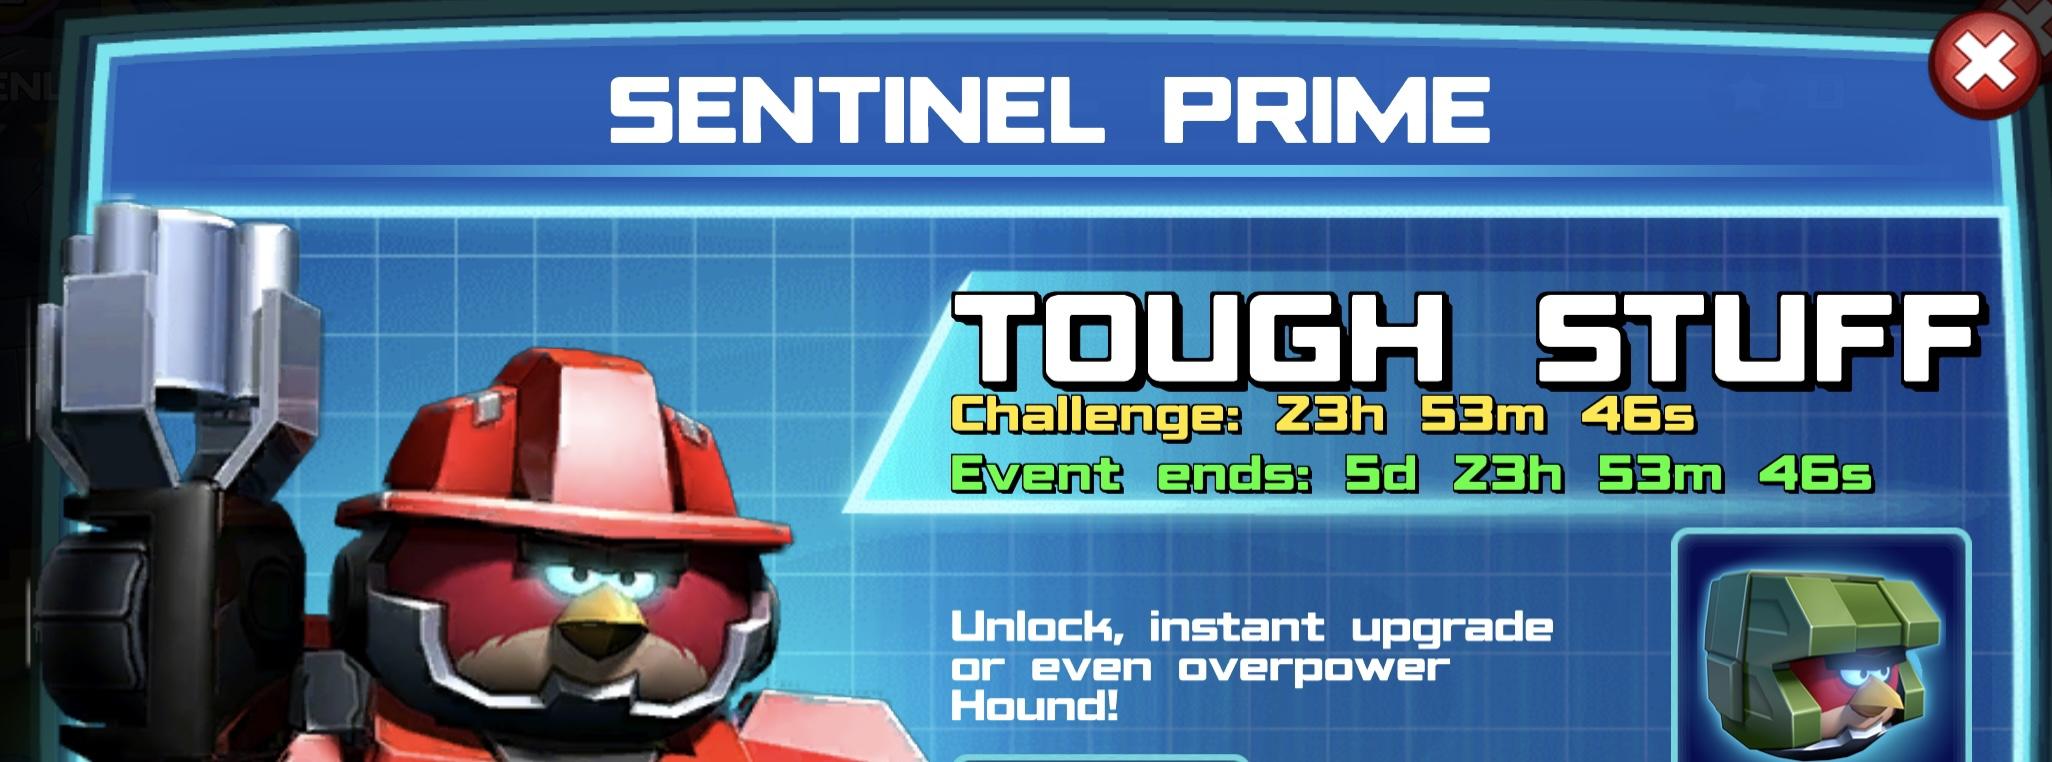 The event banner for Sentinel Prime